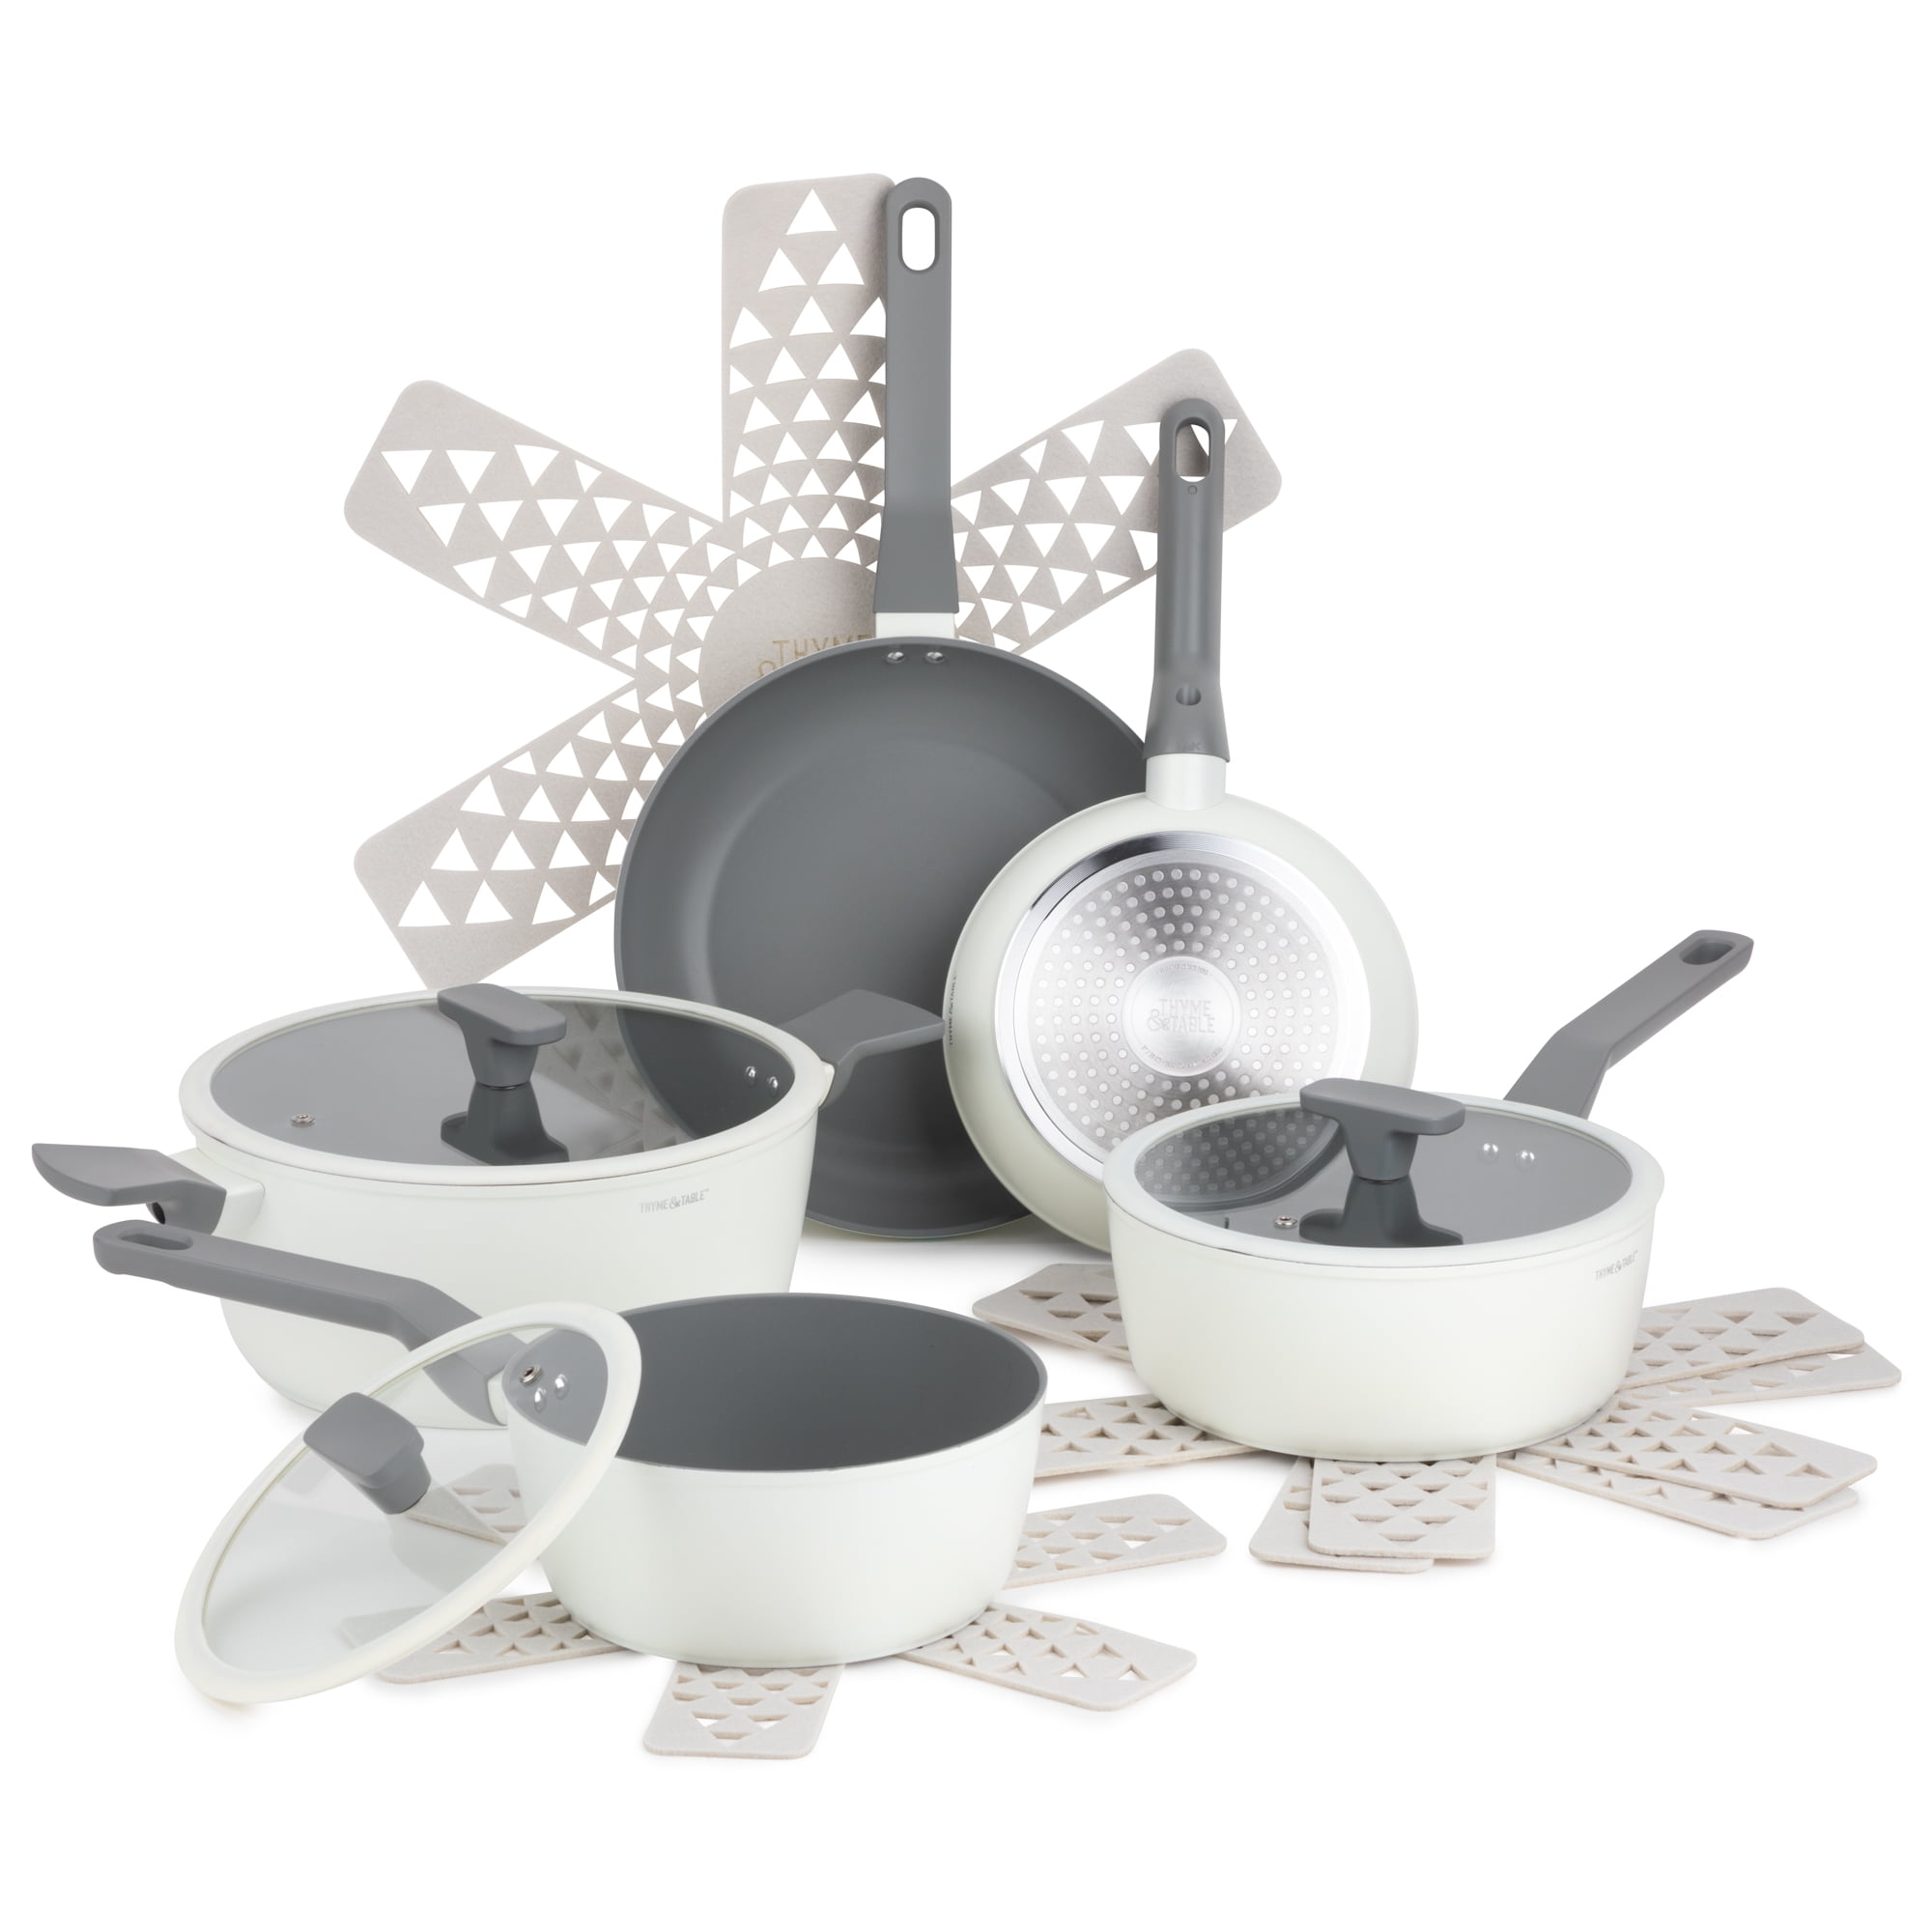 Walmart Waseca - Thyme & Table cookware sets still available. They